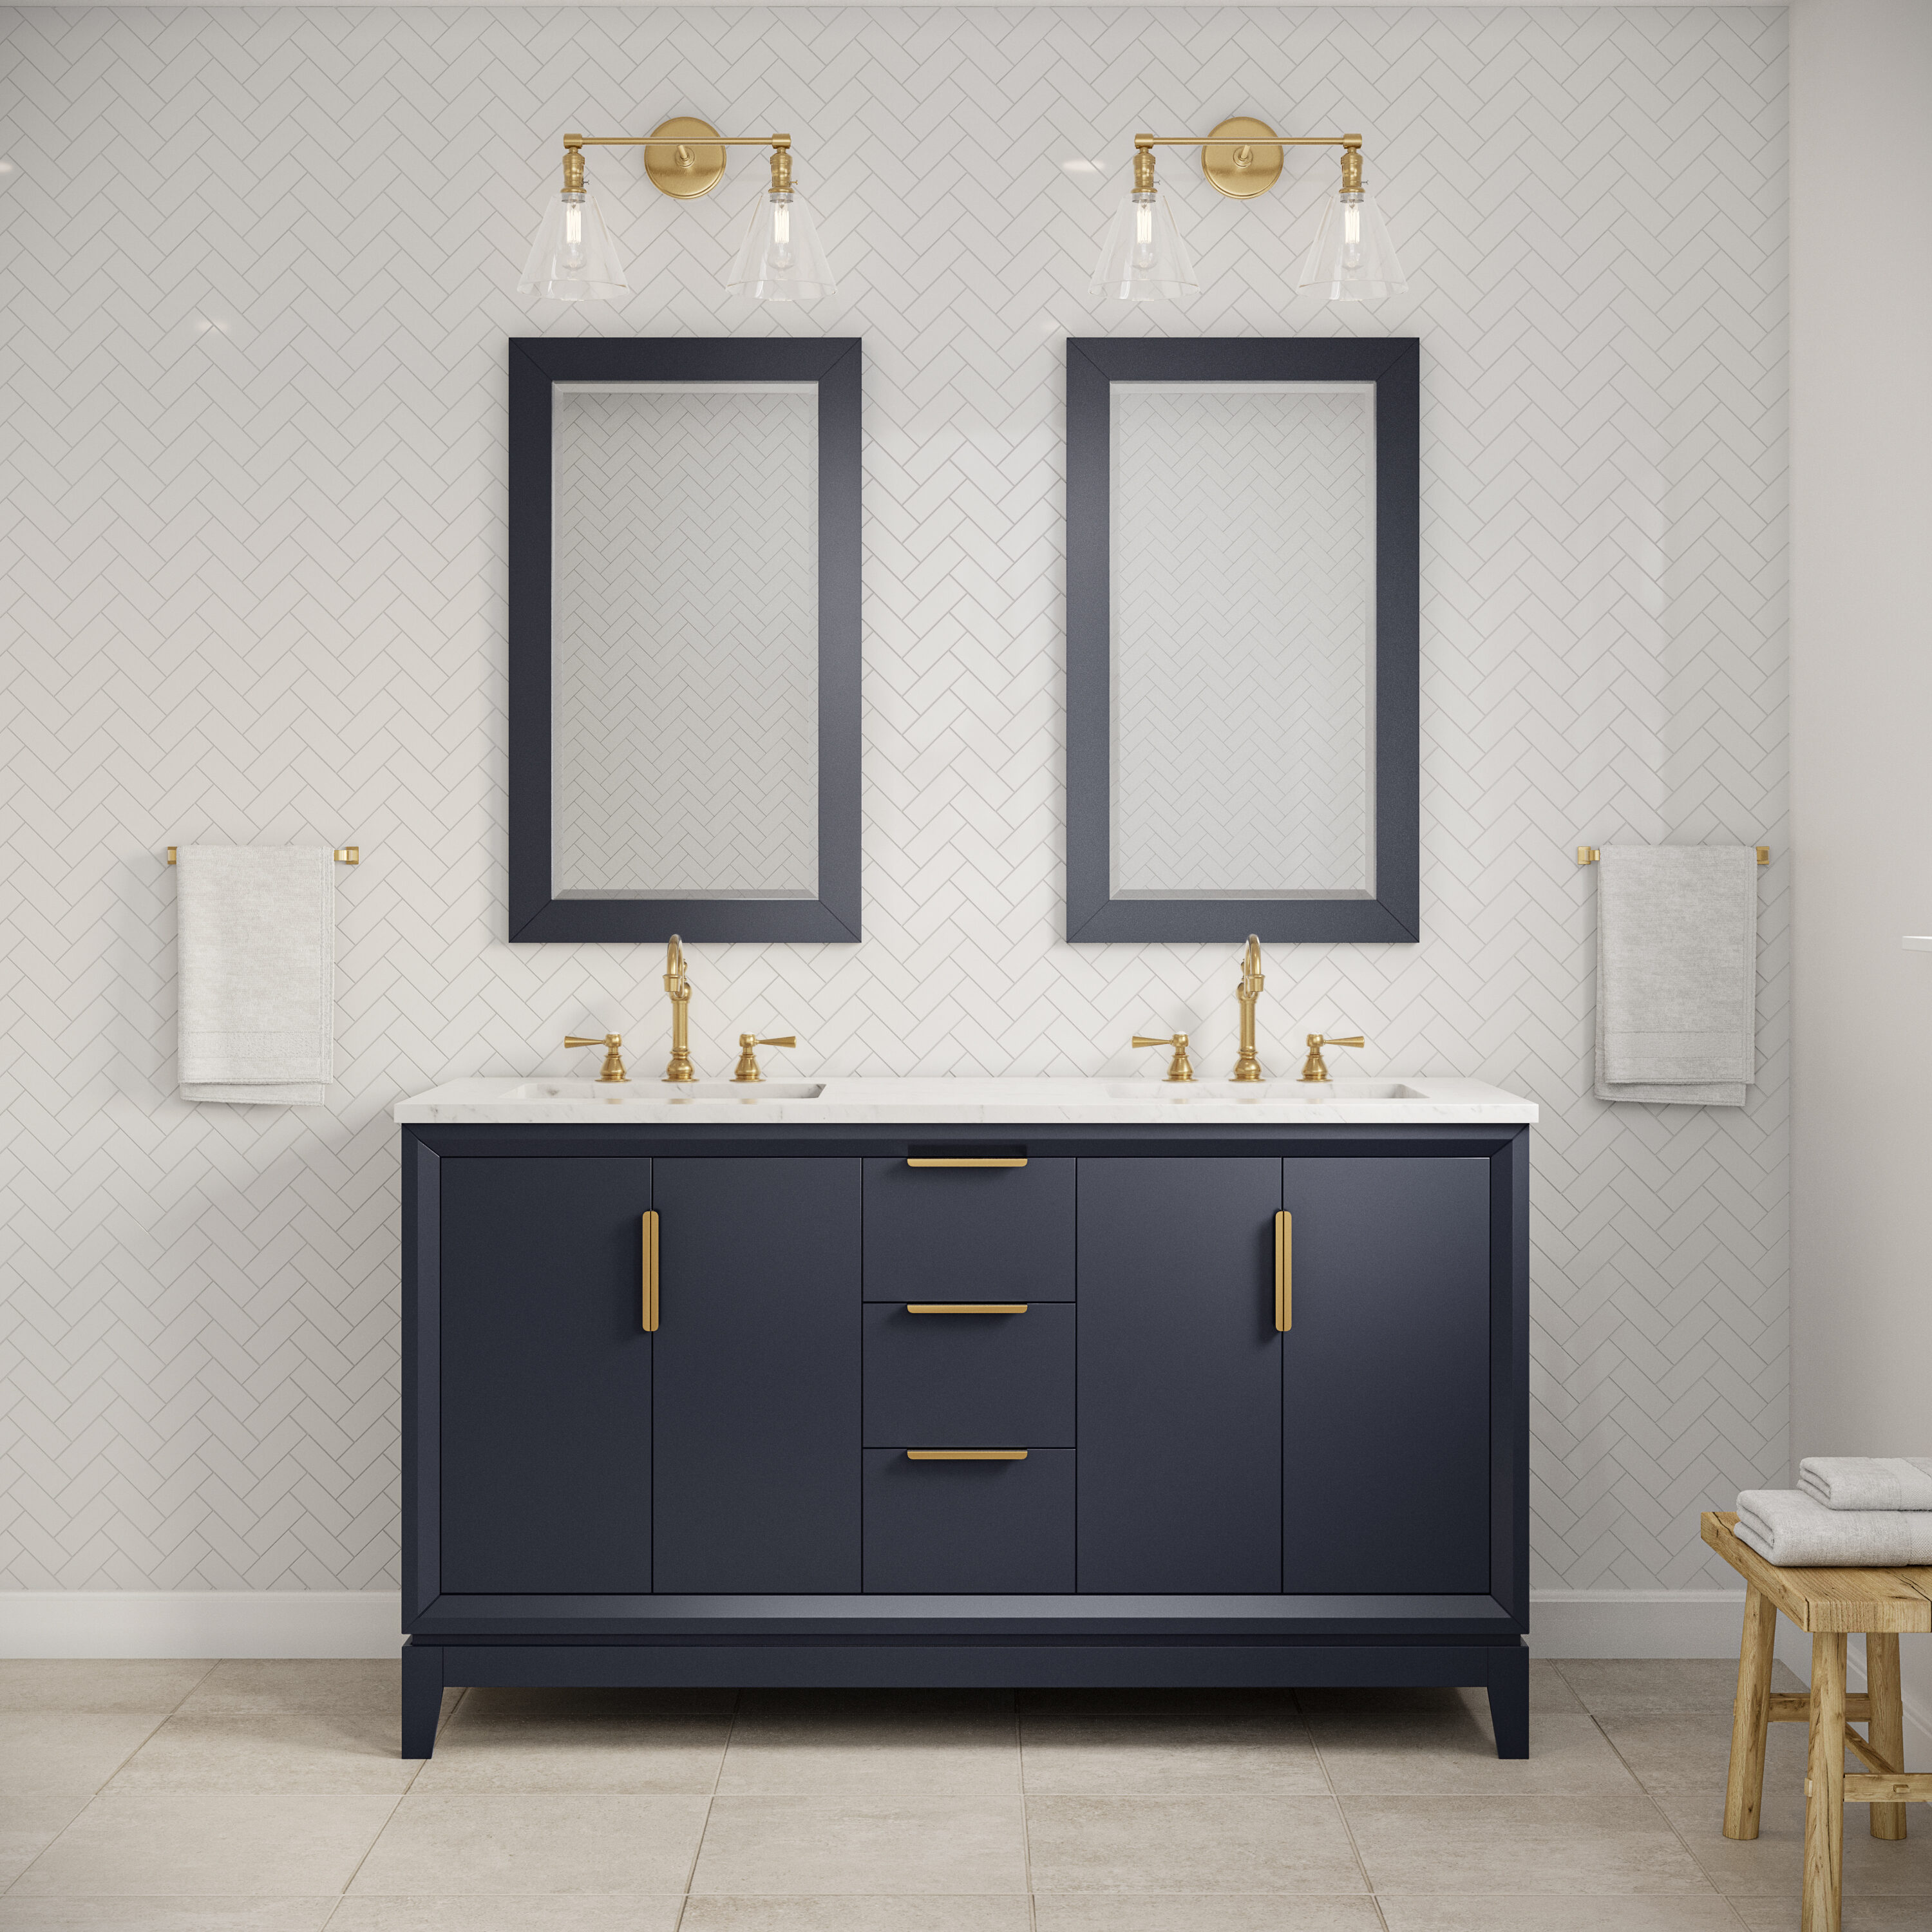 Navy Blue Bath Vanity with Antique Brass Vintage Faucet - Transitional -  Bathroom